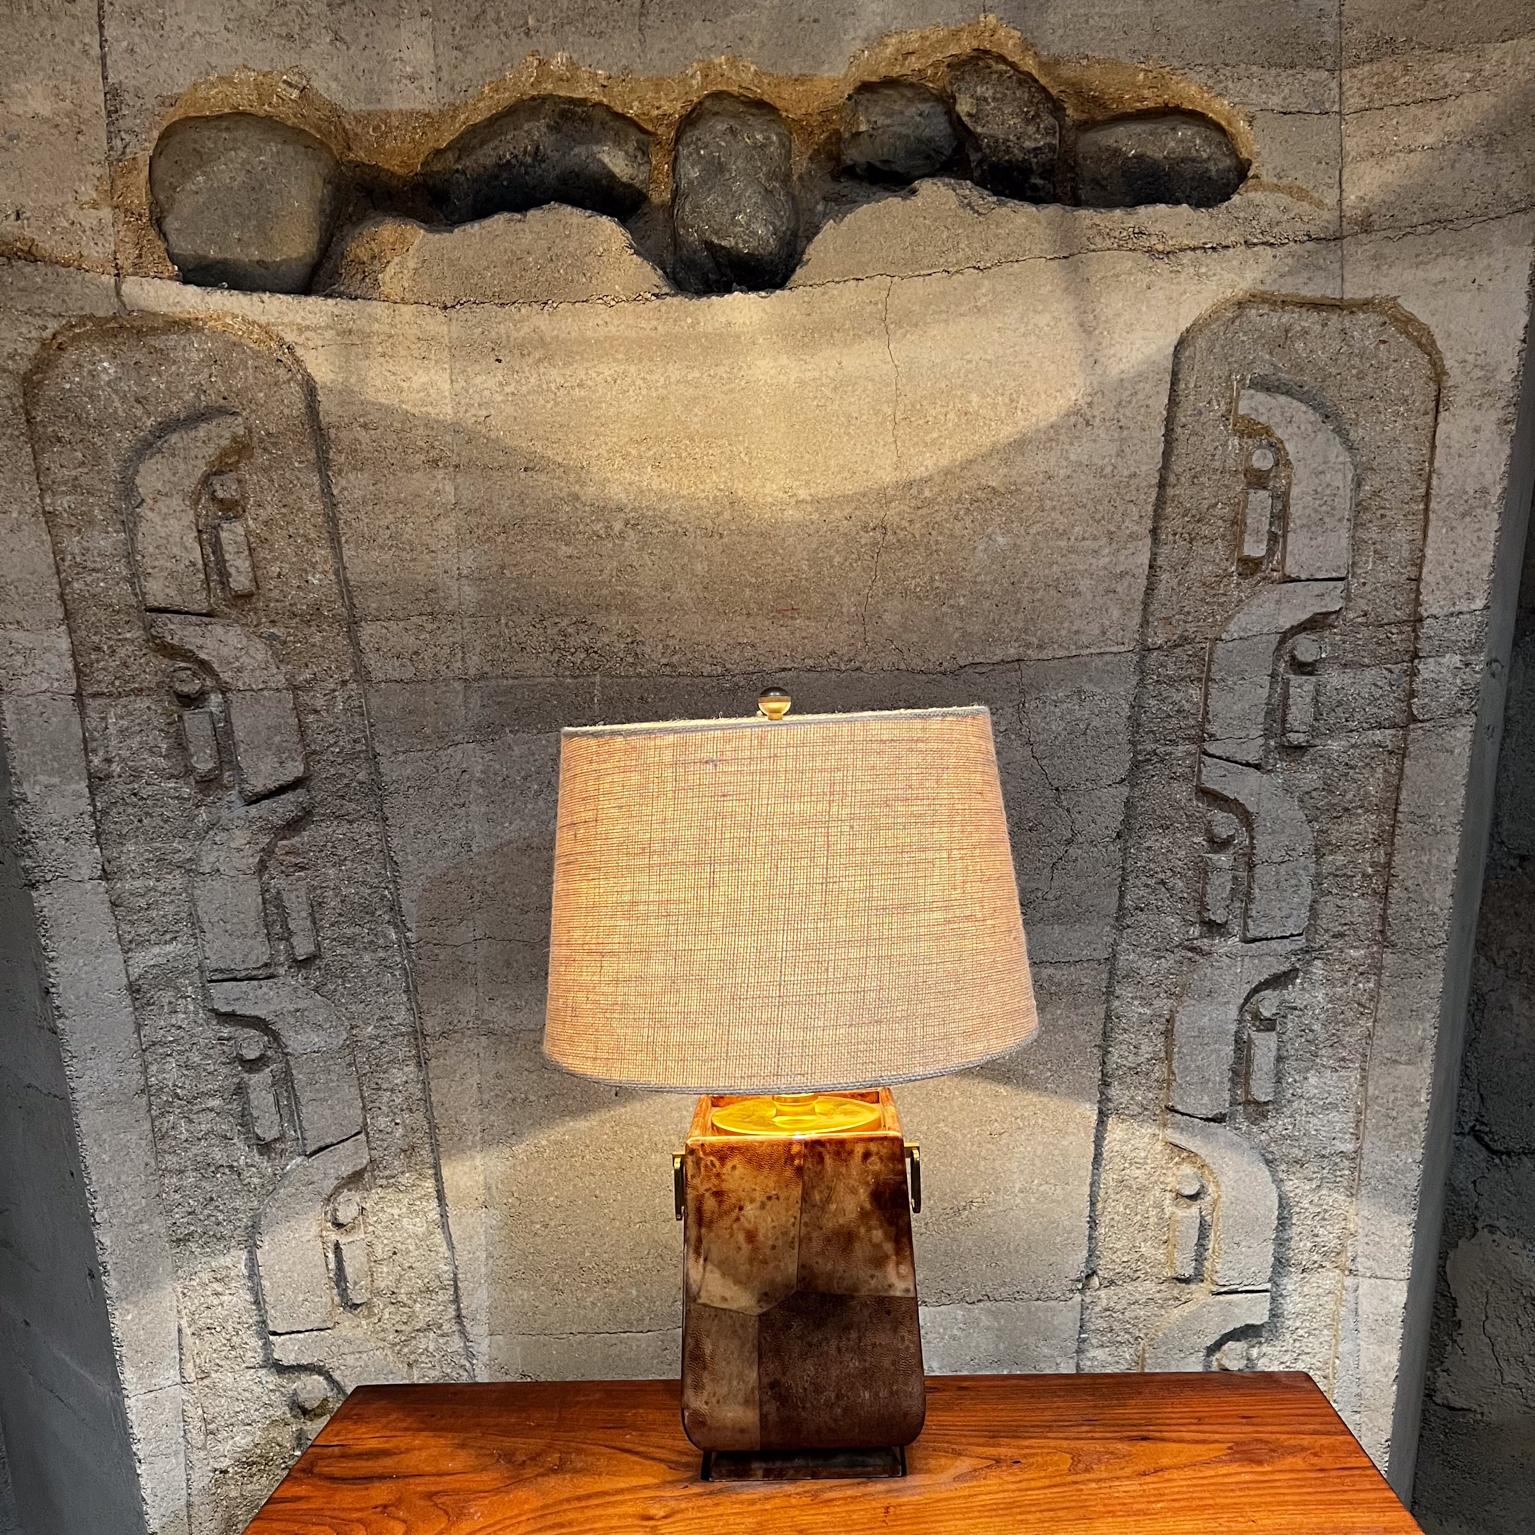 1960s Aldo Tura Lacquered Parchment Bronze Table Lamp Italy 
Elegant Brass Rings on each side.
Designer Aldo Tura, known as the master of parchment. 
Label present.
15.75 h x 7 x 7 w
Original Unrestored Vintage Condition. No shade is included.
Wear